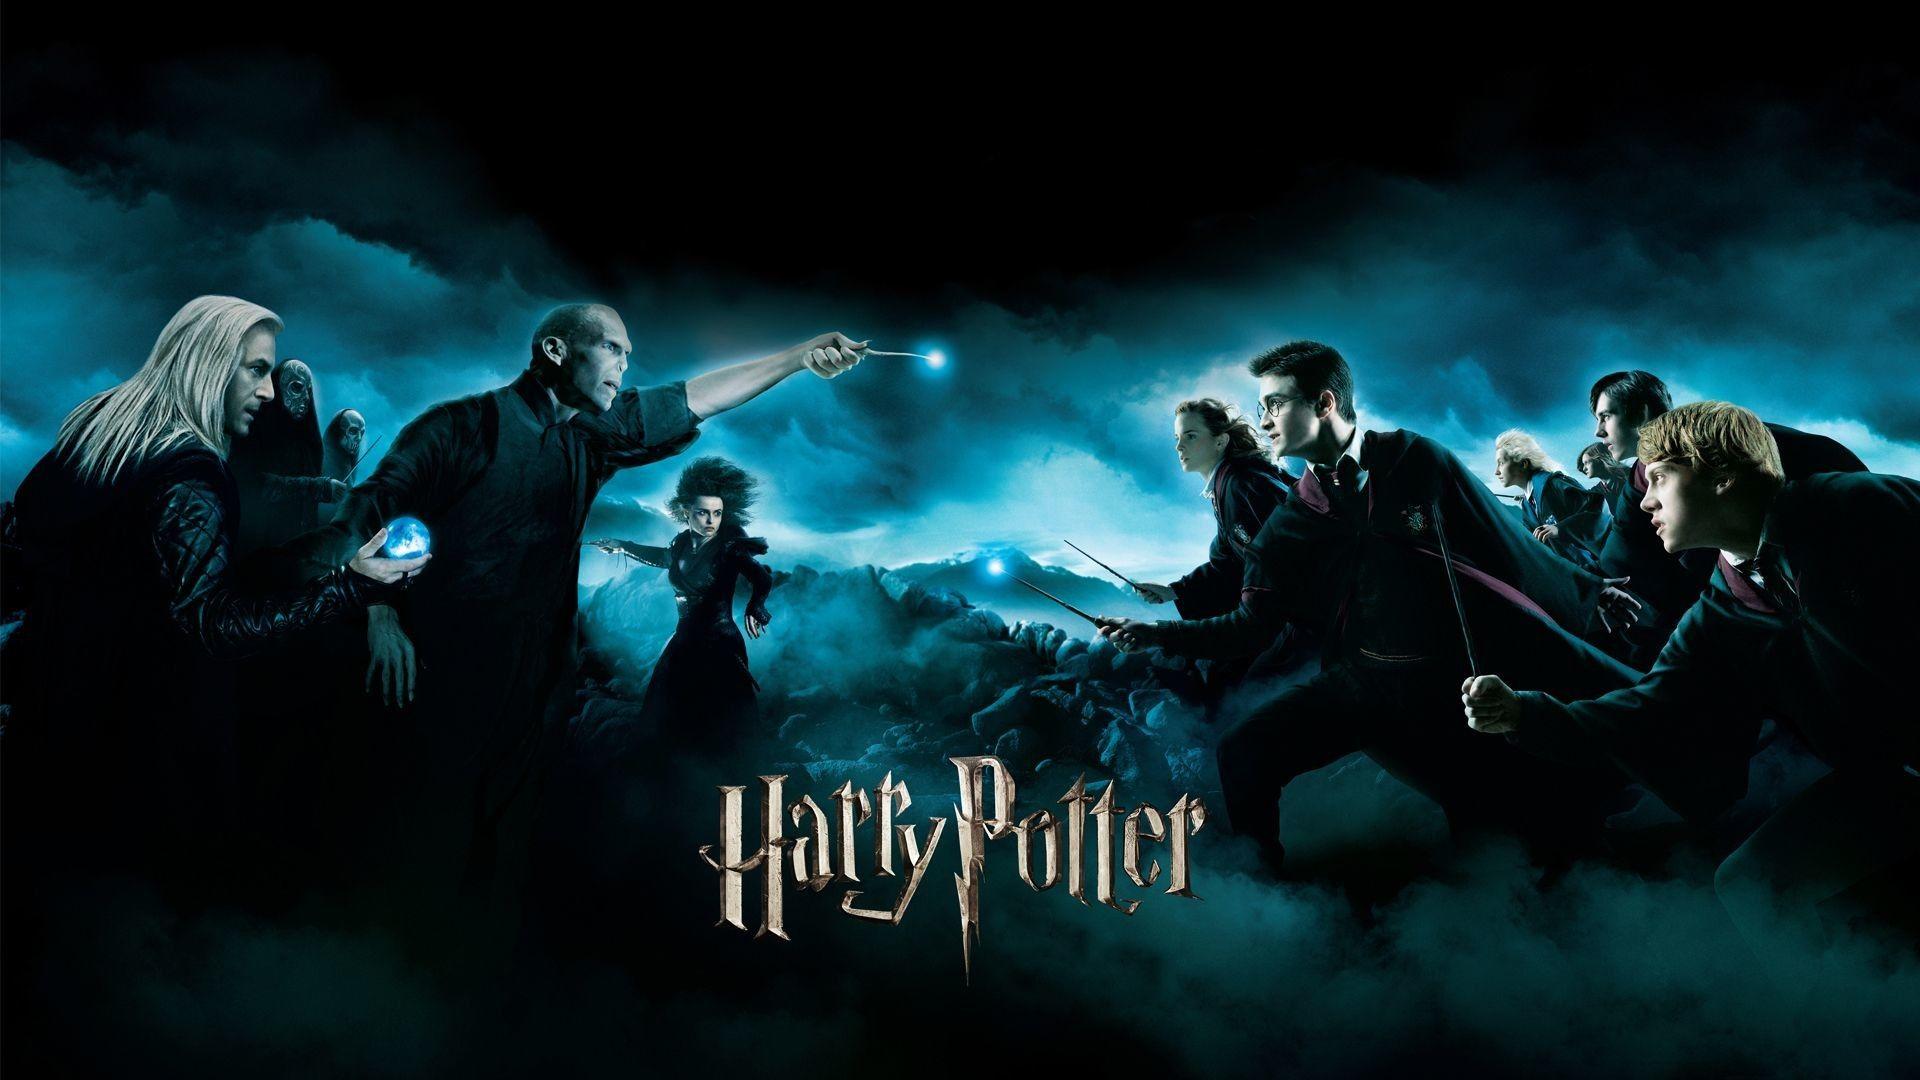 Free download Harry Potter Wallpaper HD Movie Desktop Wallpaper Harry Potter  1920x1080 for your Desktop Mobile  Tablet  Explore 49 Harry Potter  Desktop Wallpapers  Harry Potter Wallpaper Harry Potter Desktop